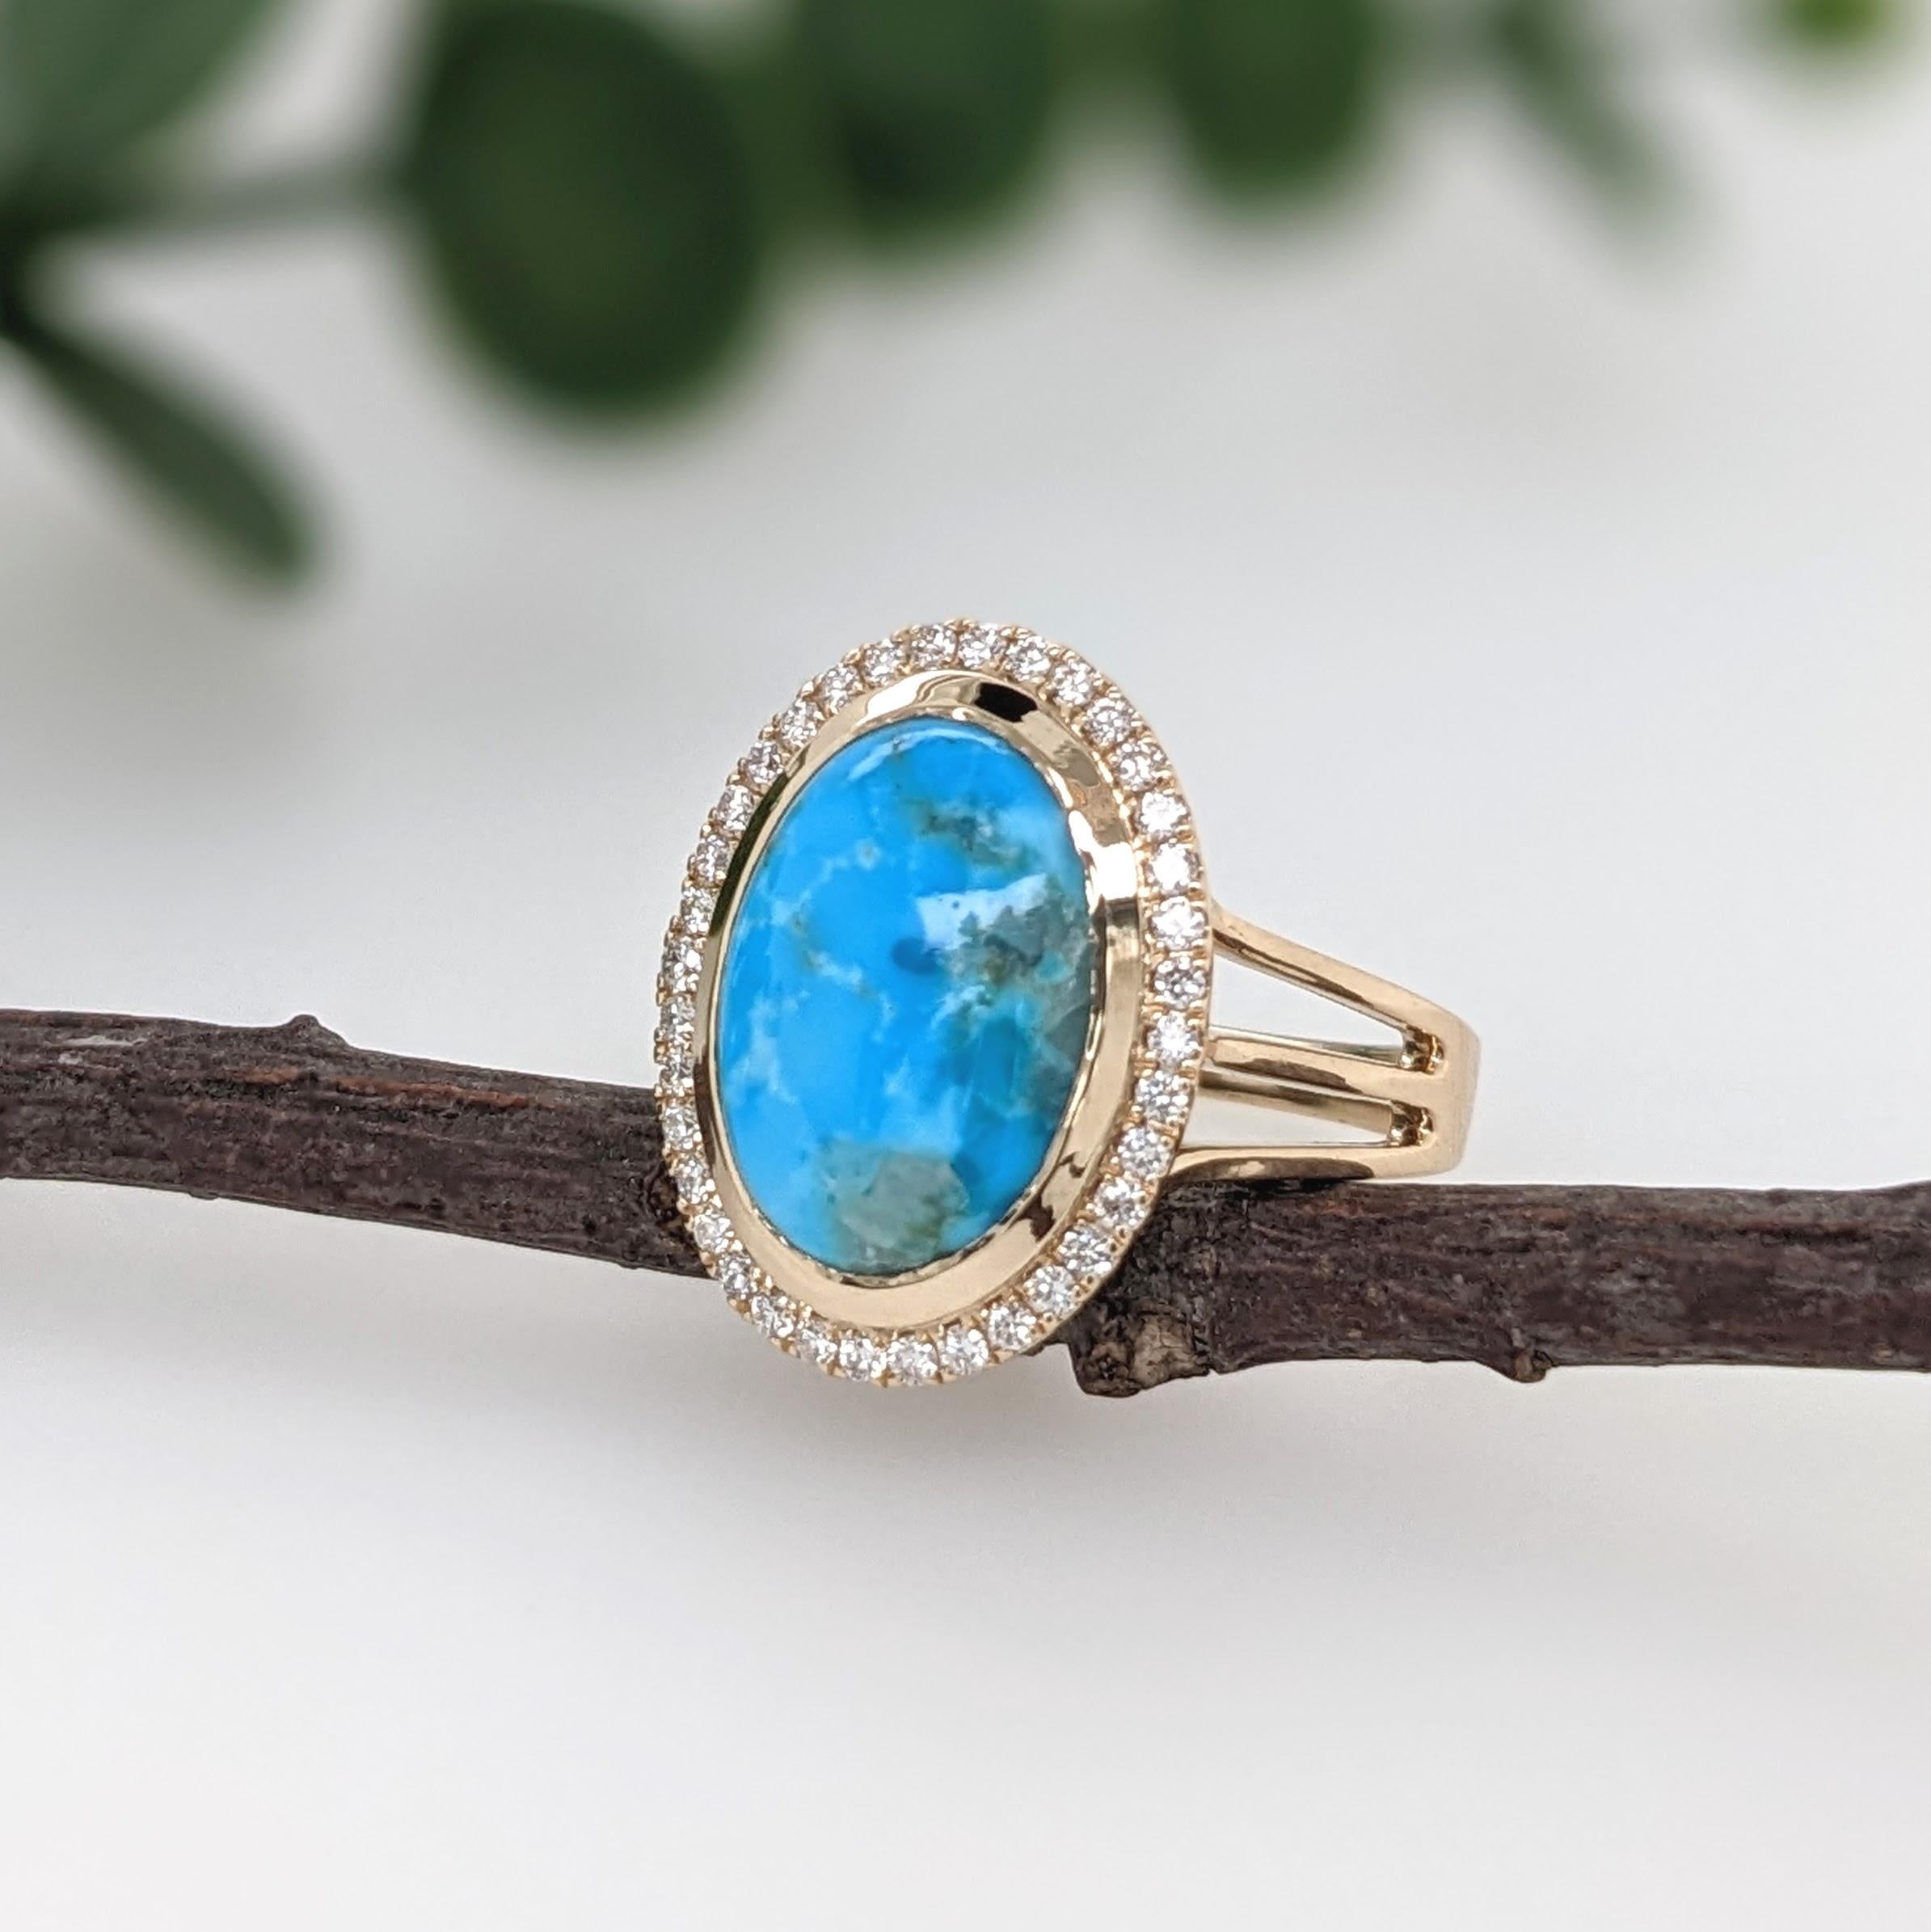 Art Deco 4.68ct Sonoran Turquoise Ring w Diamond Halo in 14k Solid Yellow Gold Oval 14x10